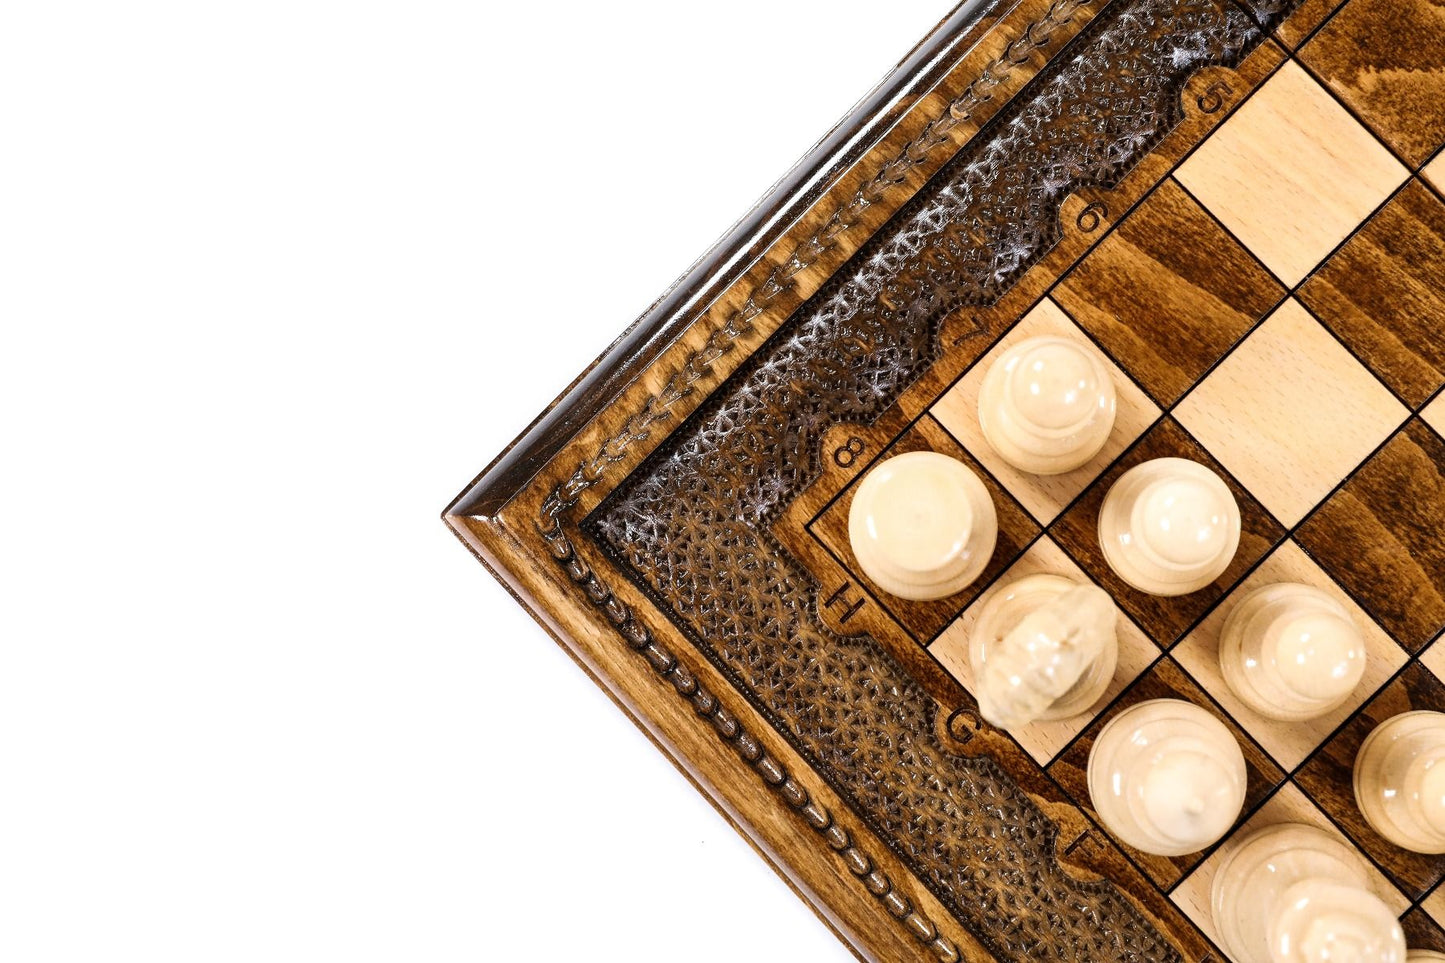 Engage in the art of strategy with a dual-purpose game set, where the craftsmanship of chess meets the excitement of backgammon in artisanal elegance.